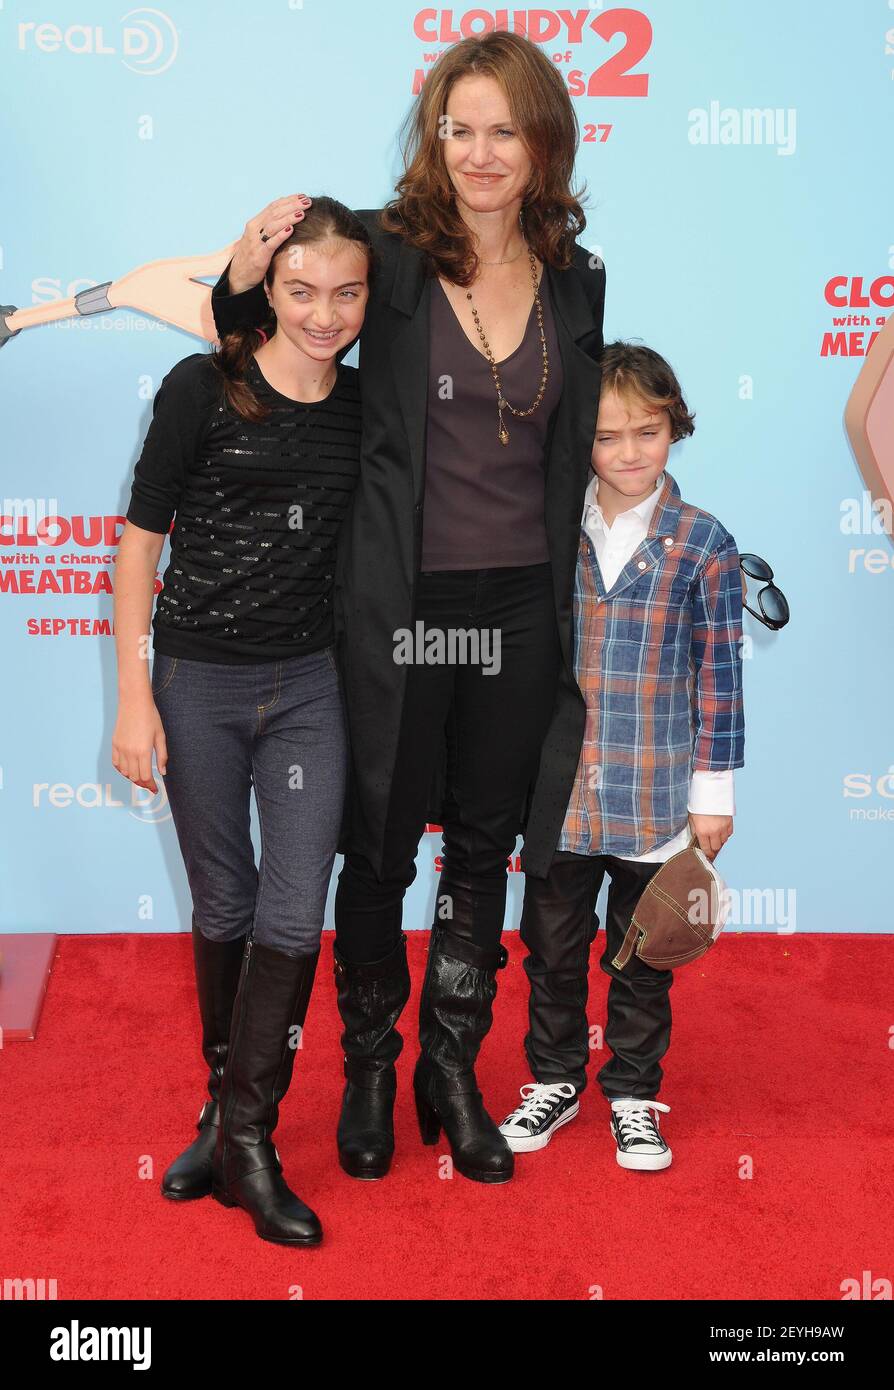 21 September 2013 - Westwood, California - Amy Brenneman and her children Bodhi Russell Silberling (L) and Charlotte Tucker Silberling. 'Cloudy With A Chance Of Meatballs 2' Los Angeles Premiere held at Regency Village Theatre. Photo Credit: Byron Purvis/AdMedia/Sipa USA Stock Photo